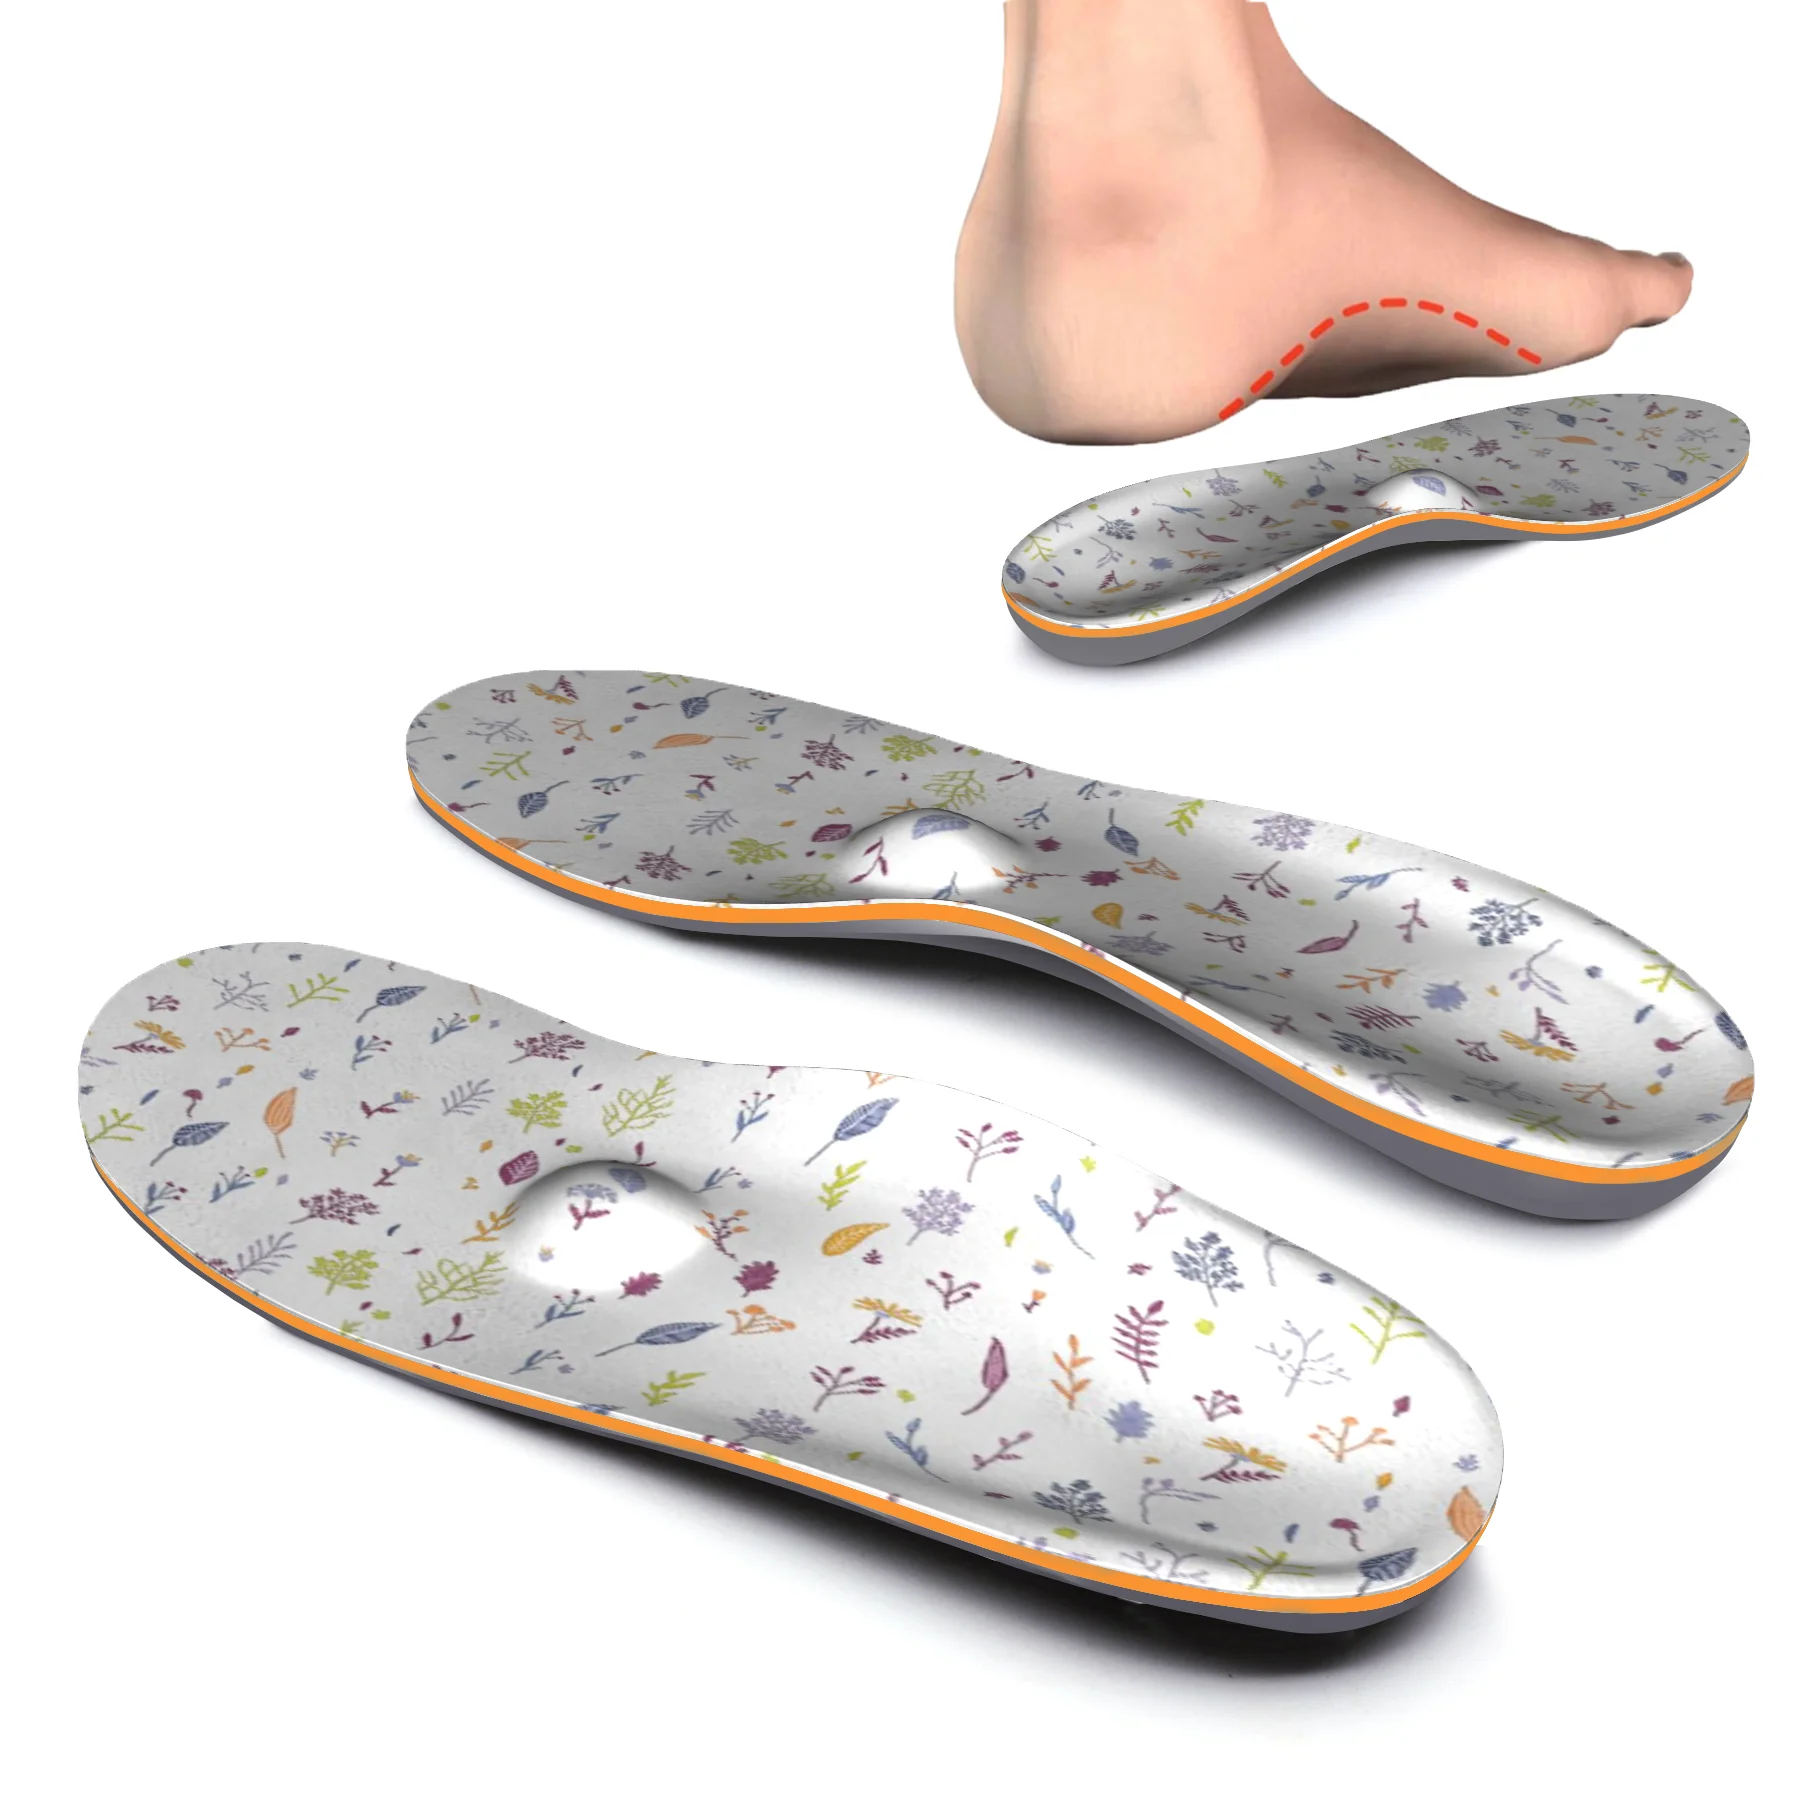 White Printing Arch Supports Orthotics Inserts Relieve Flat Feet, High Arch, Foot Pain For Women  Plantar Fasciitis Feet Insoles